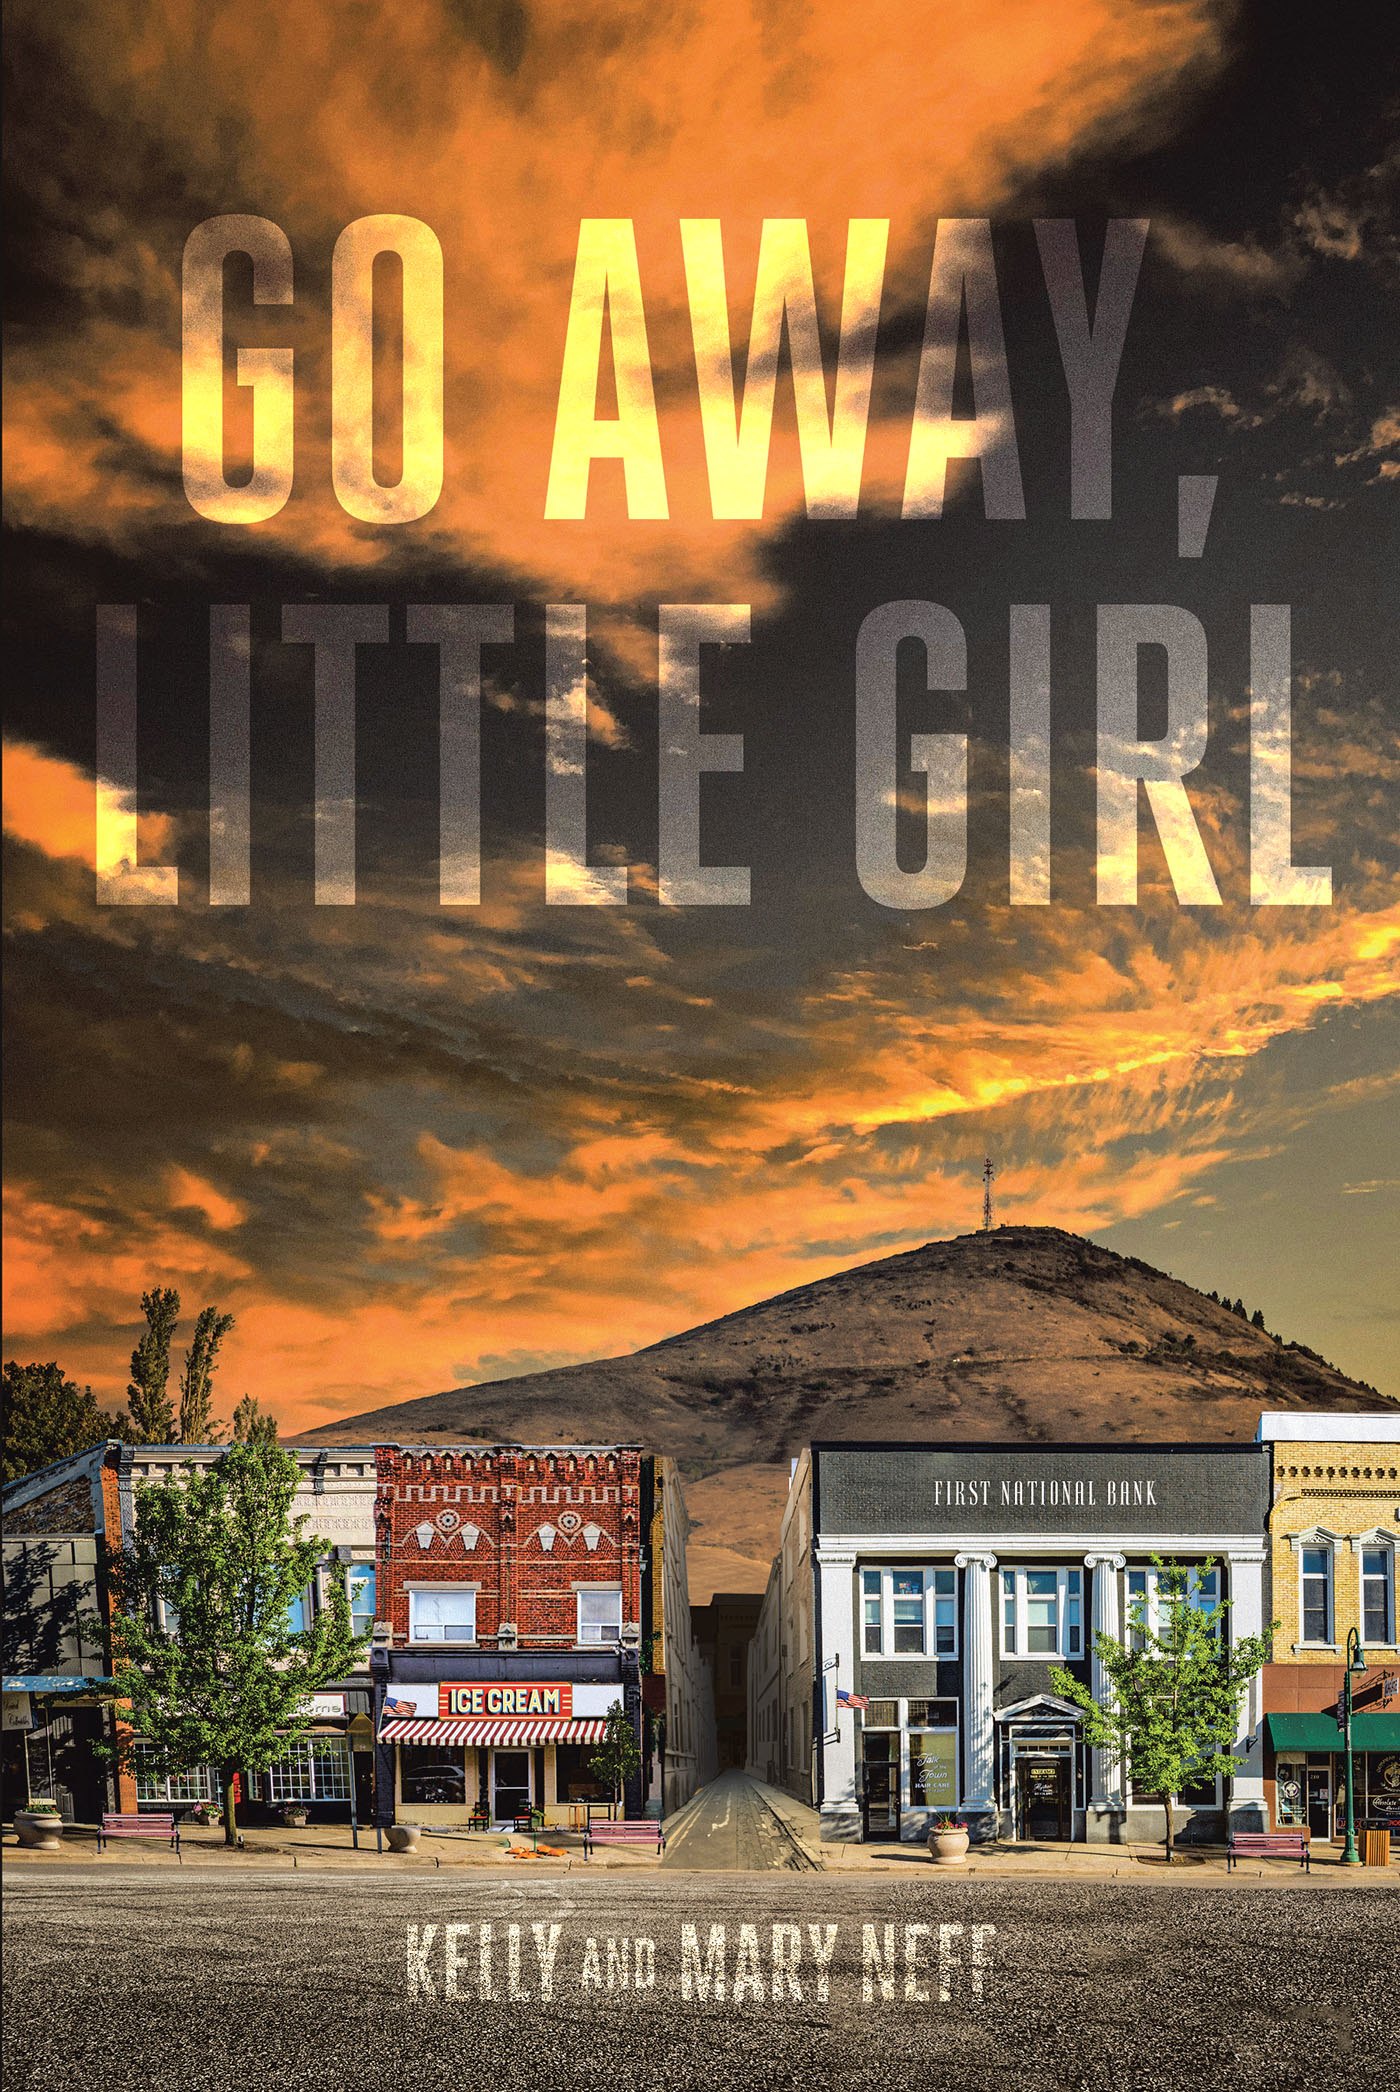 Kelly and Mary Neff’s Newly Released "Go Away, Little Girl" is a Tale of Suspense and Unexpected Foes as a Couple Race to Solve a Missing Persons Case